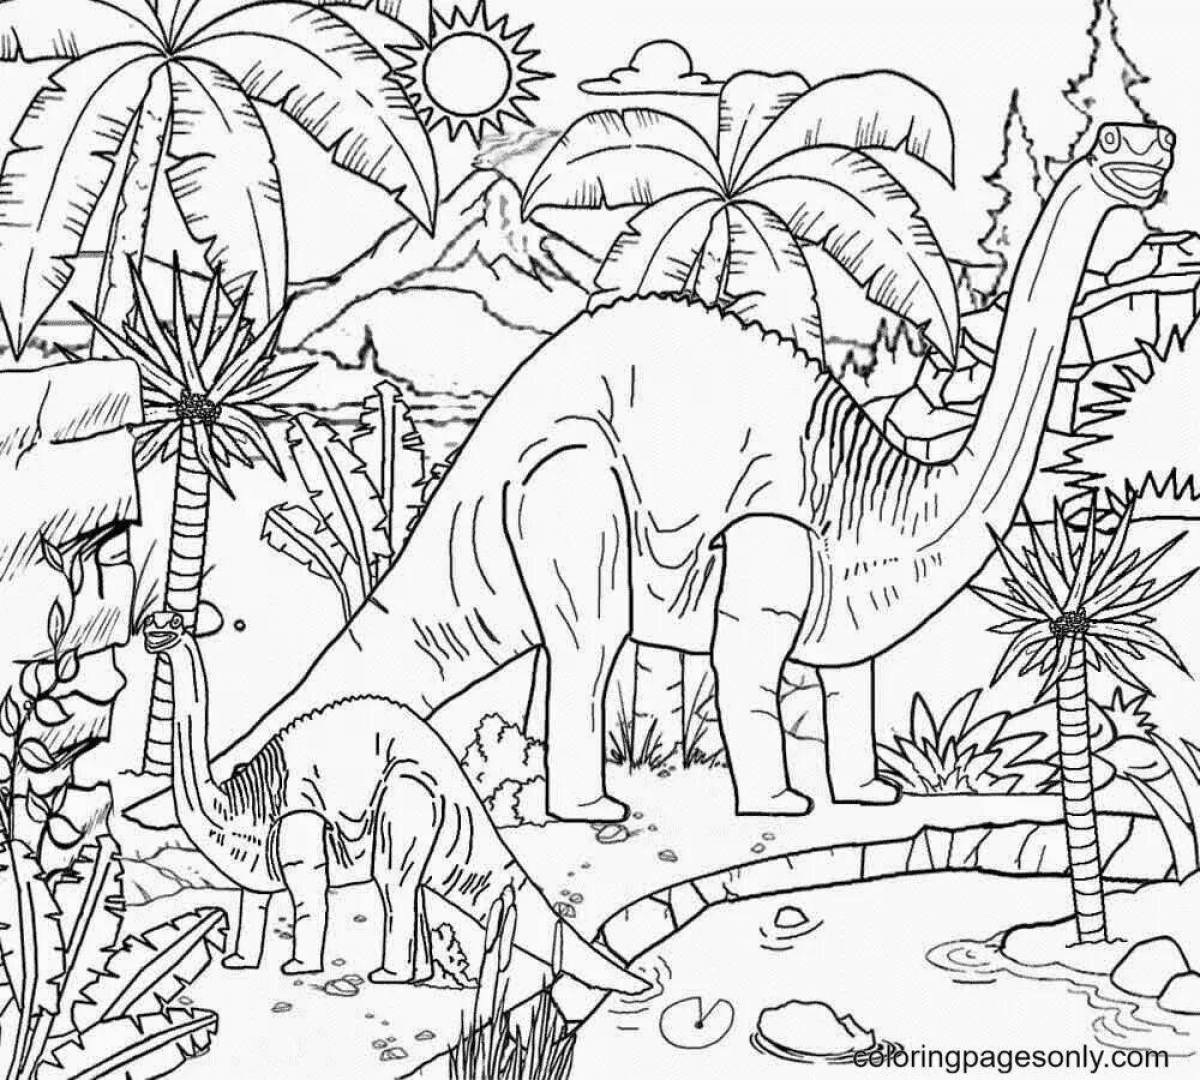 Amazing coloring pages dinosaurs all